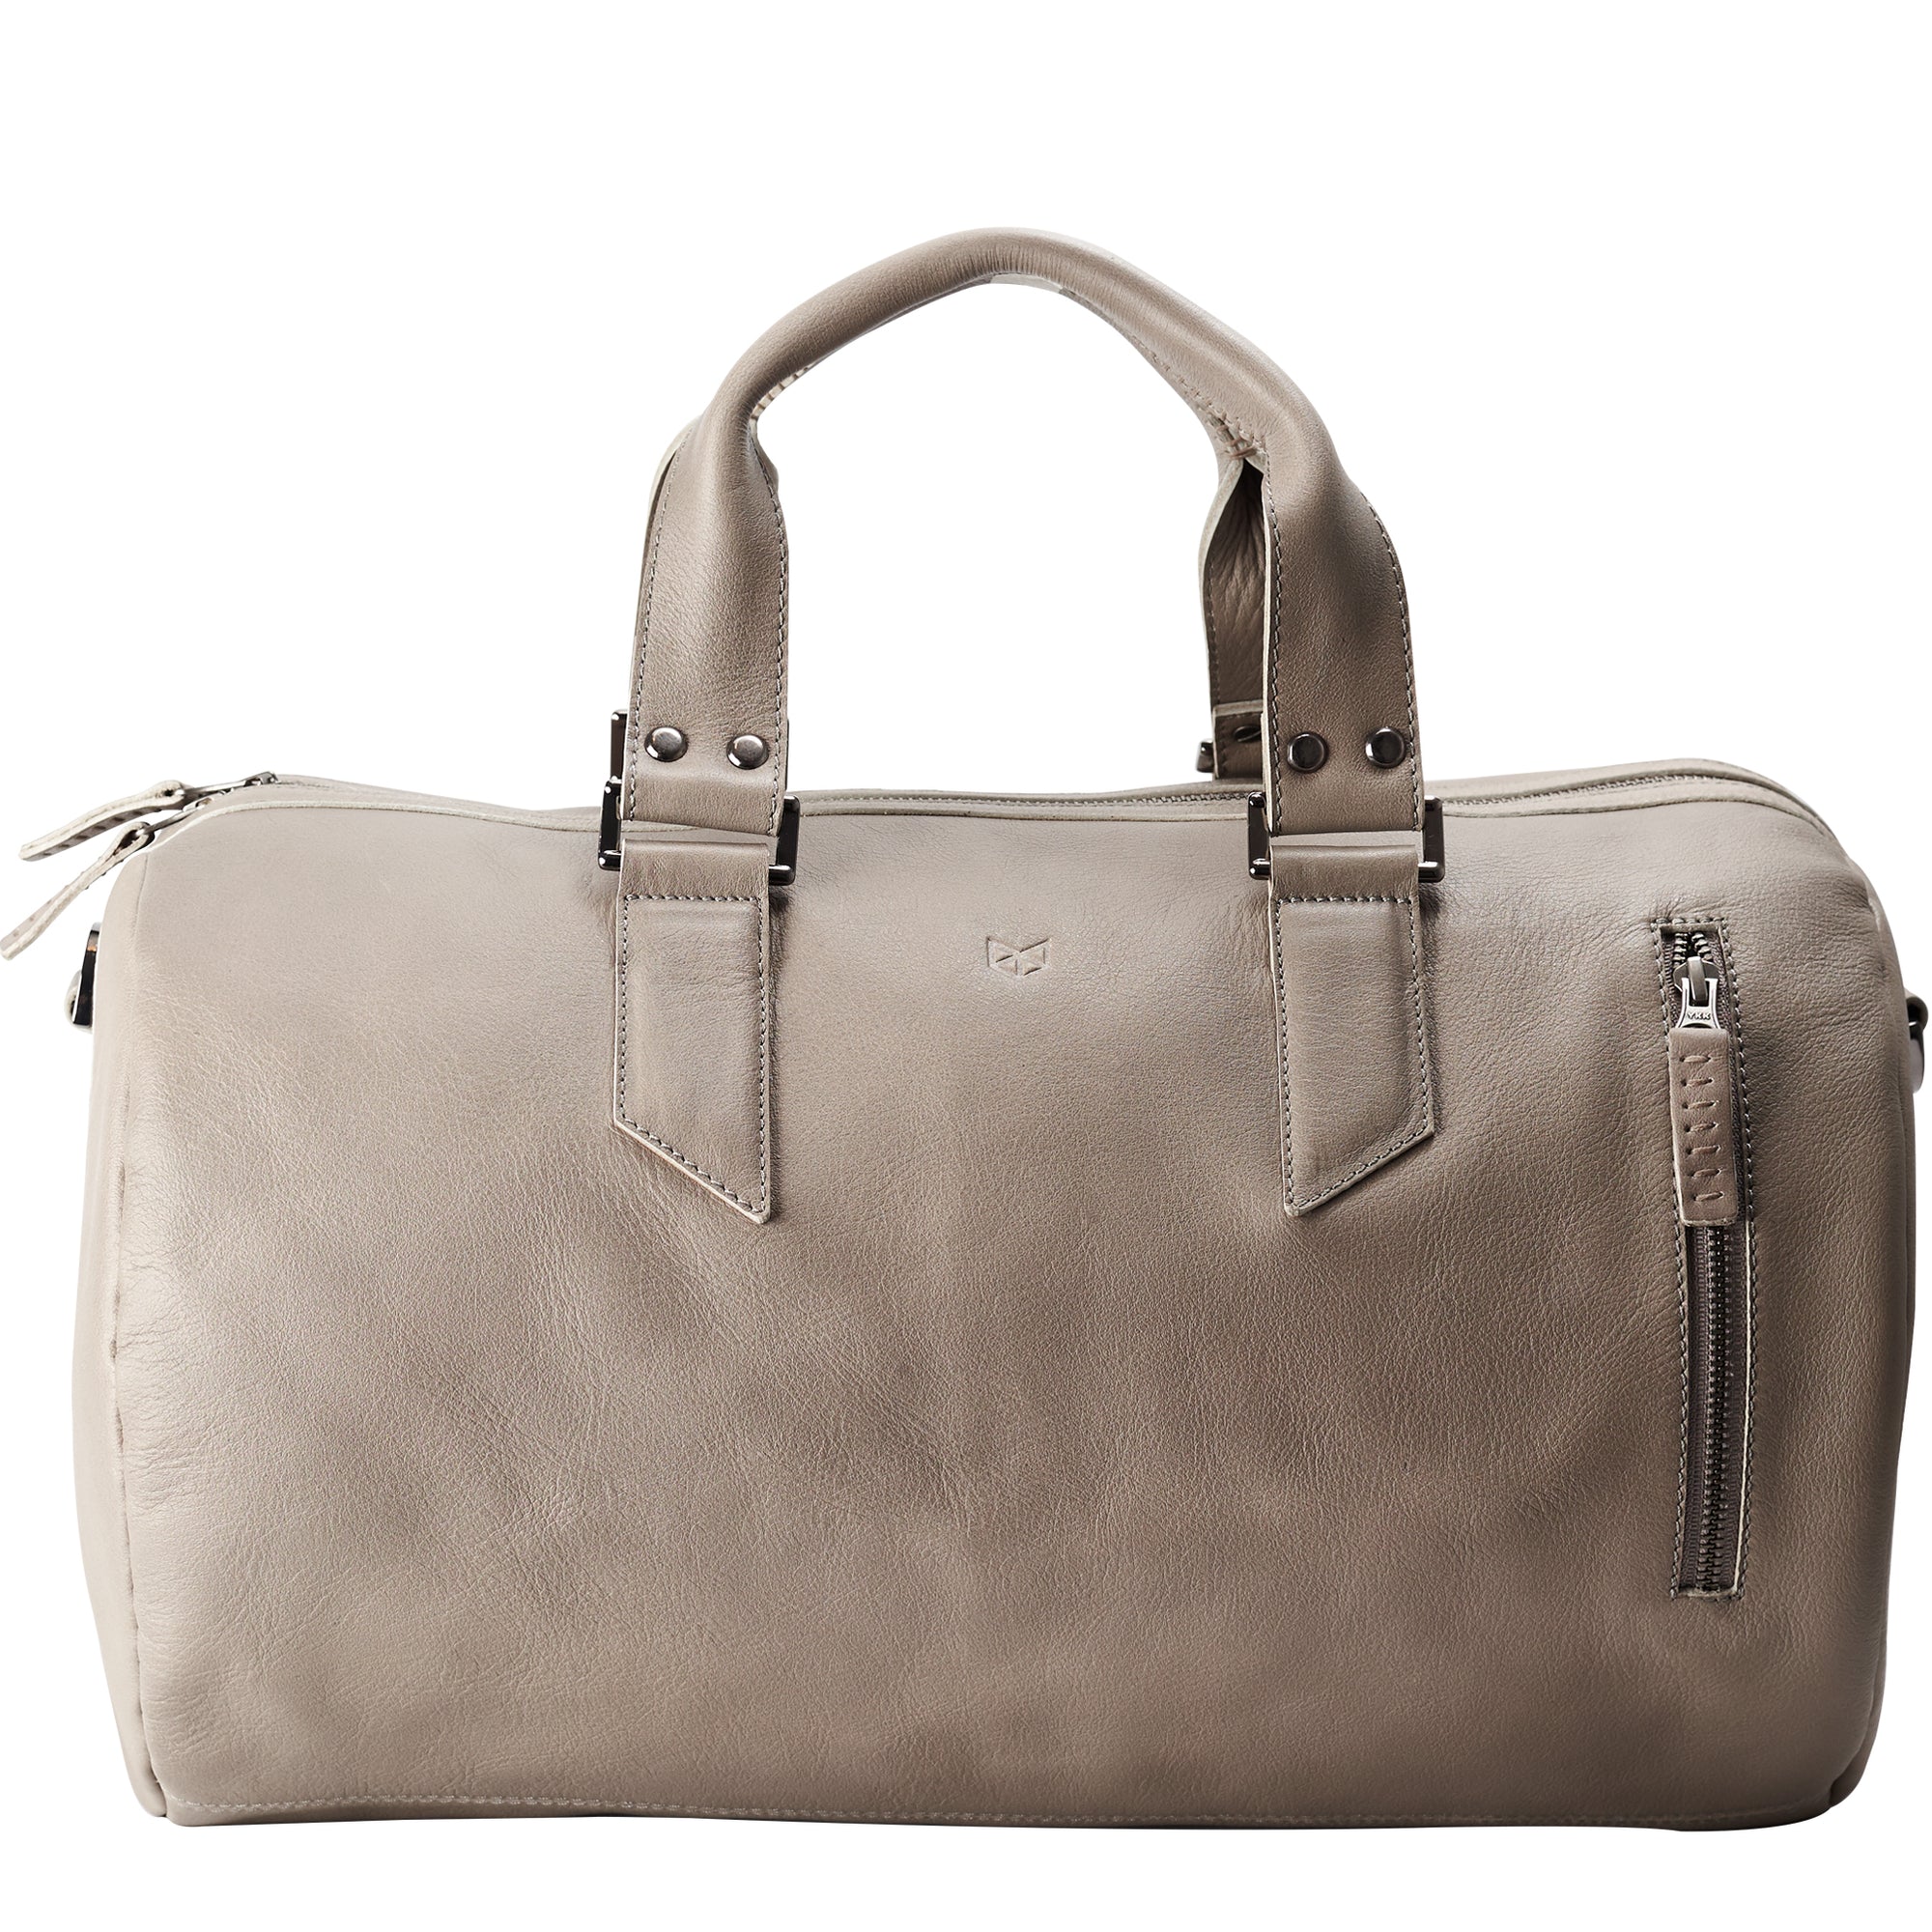 handcrafted Grey leather duffle bag for men. Grey leather carryall bag. 